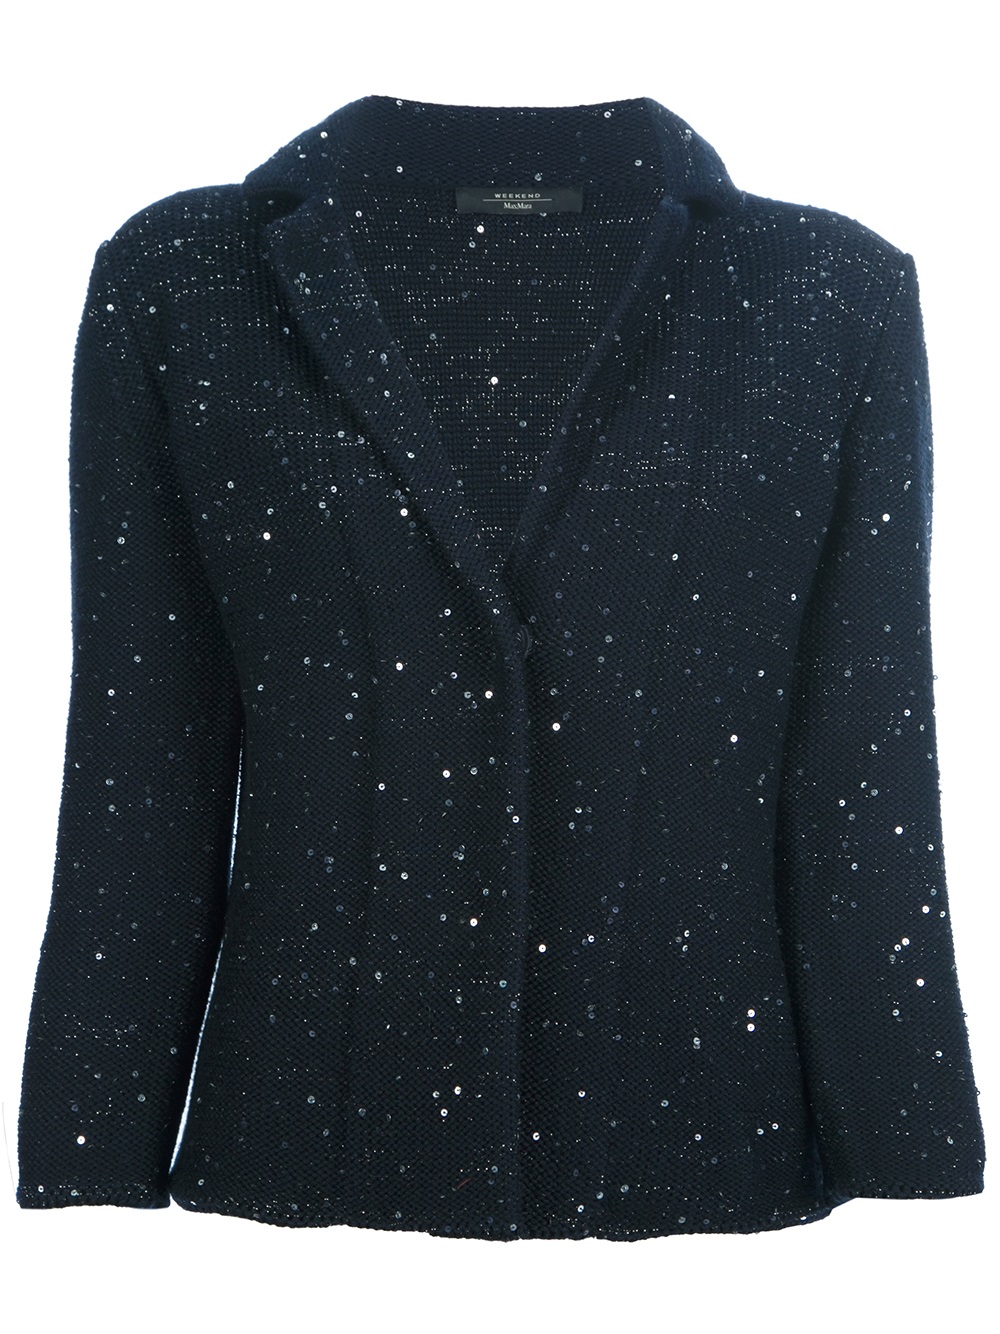 Weekend by Maxmara Cortona Knitted Sequin Jacket in Navy (Blue) - Lyst